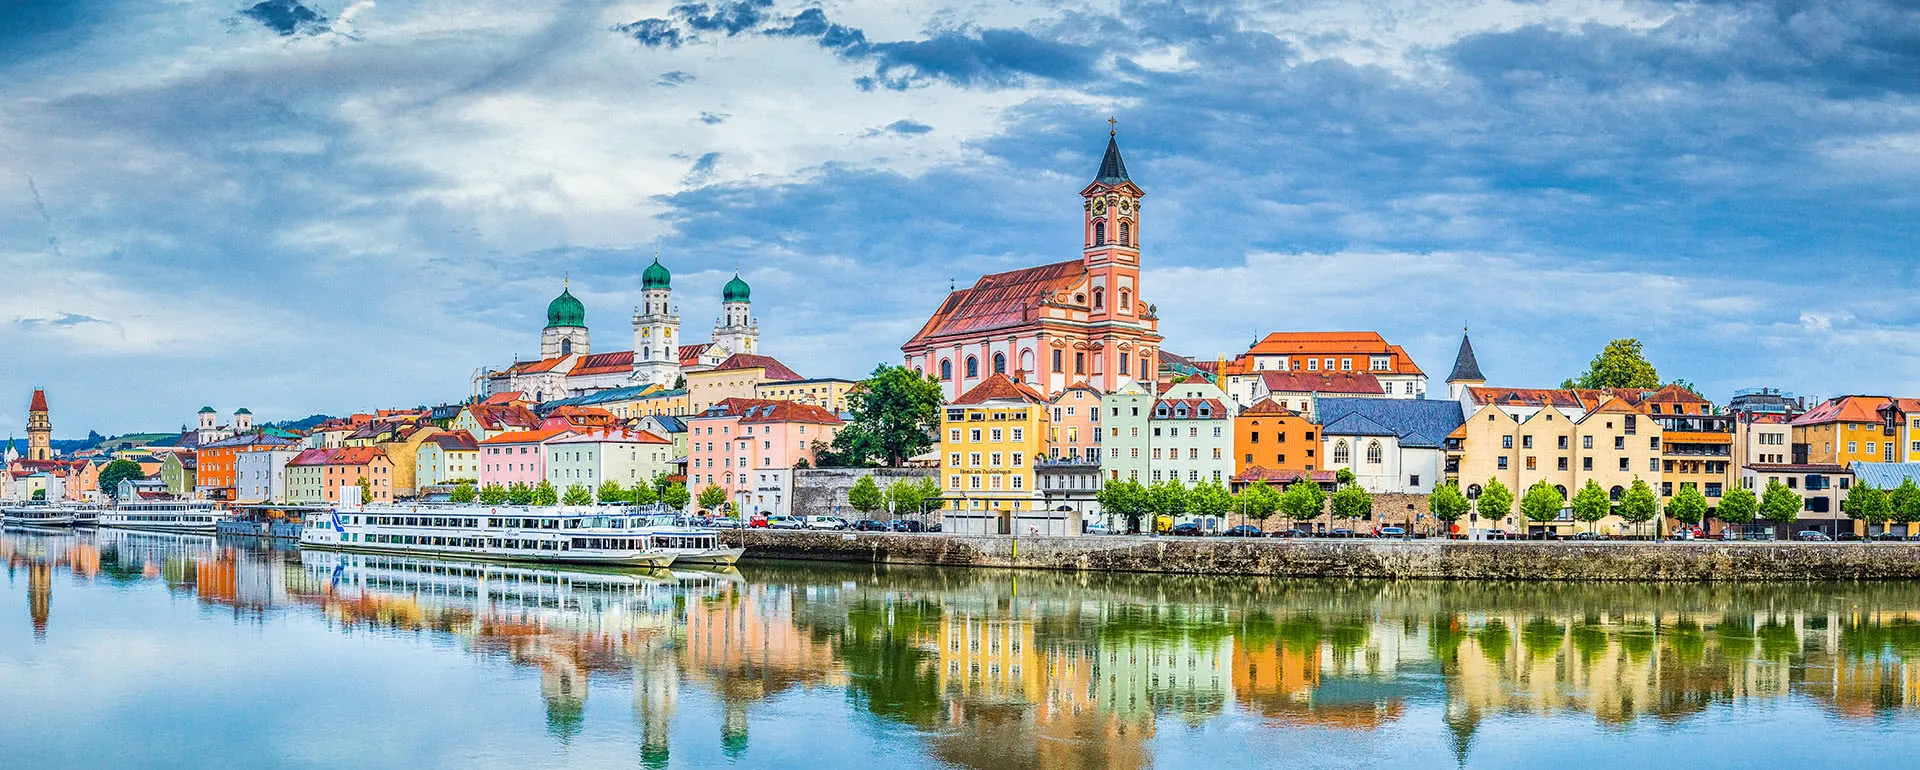 Passau - the destination with youth hostels